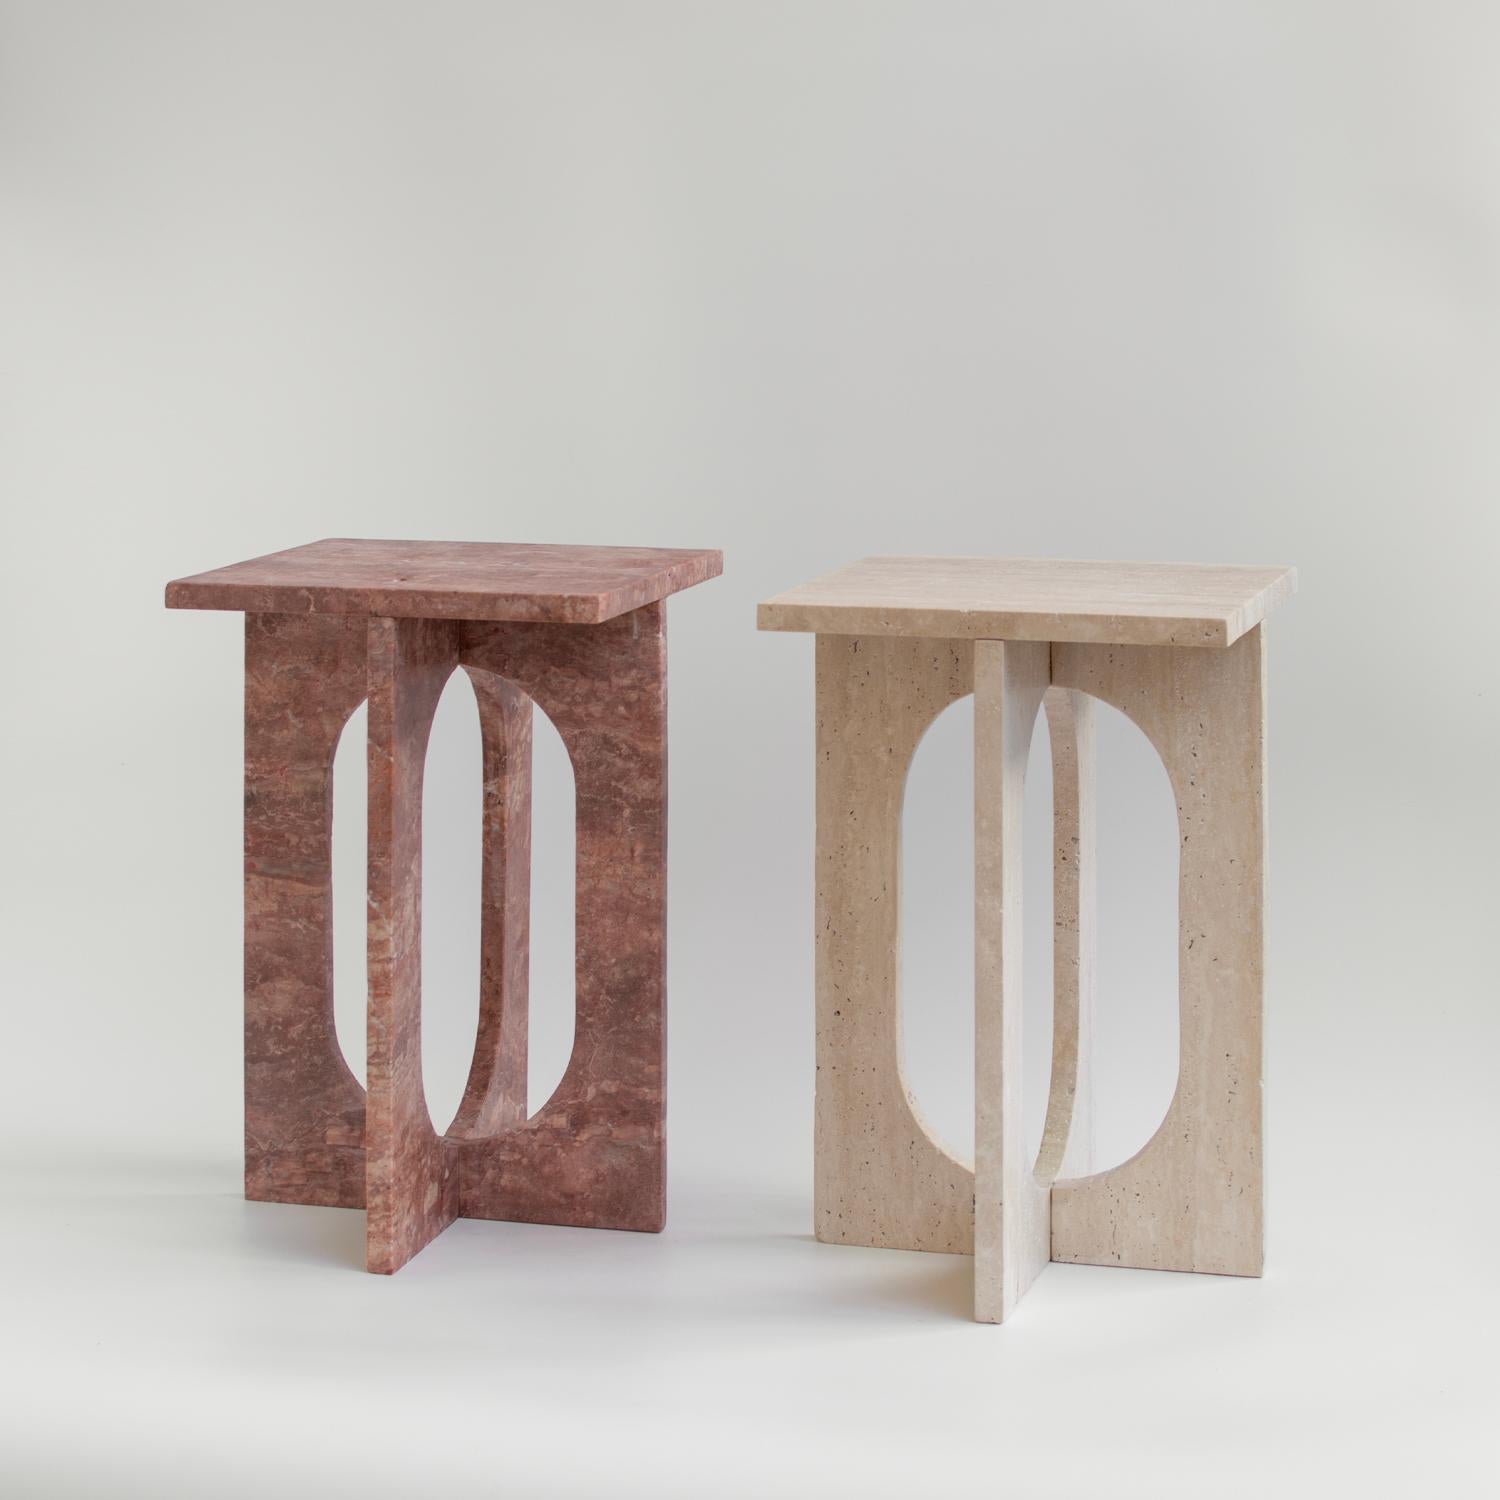 BOND Side Table in Red Travertine -  Bond Side Table evokes simplicity with its modern, clean design. Crafted from honed travertine, this piece is a stylish addition to any space with its sophisticated, clean lines and sleek construction. Use Bond